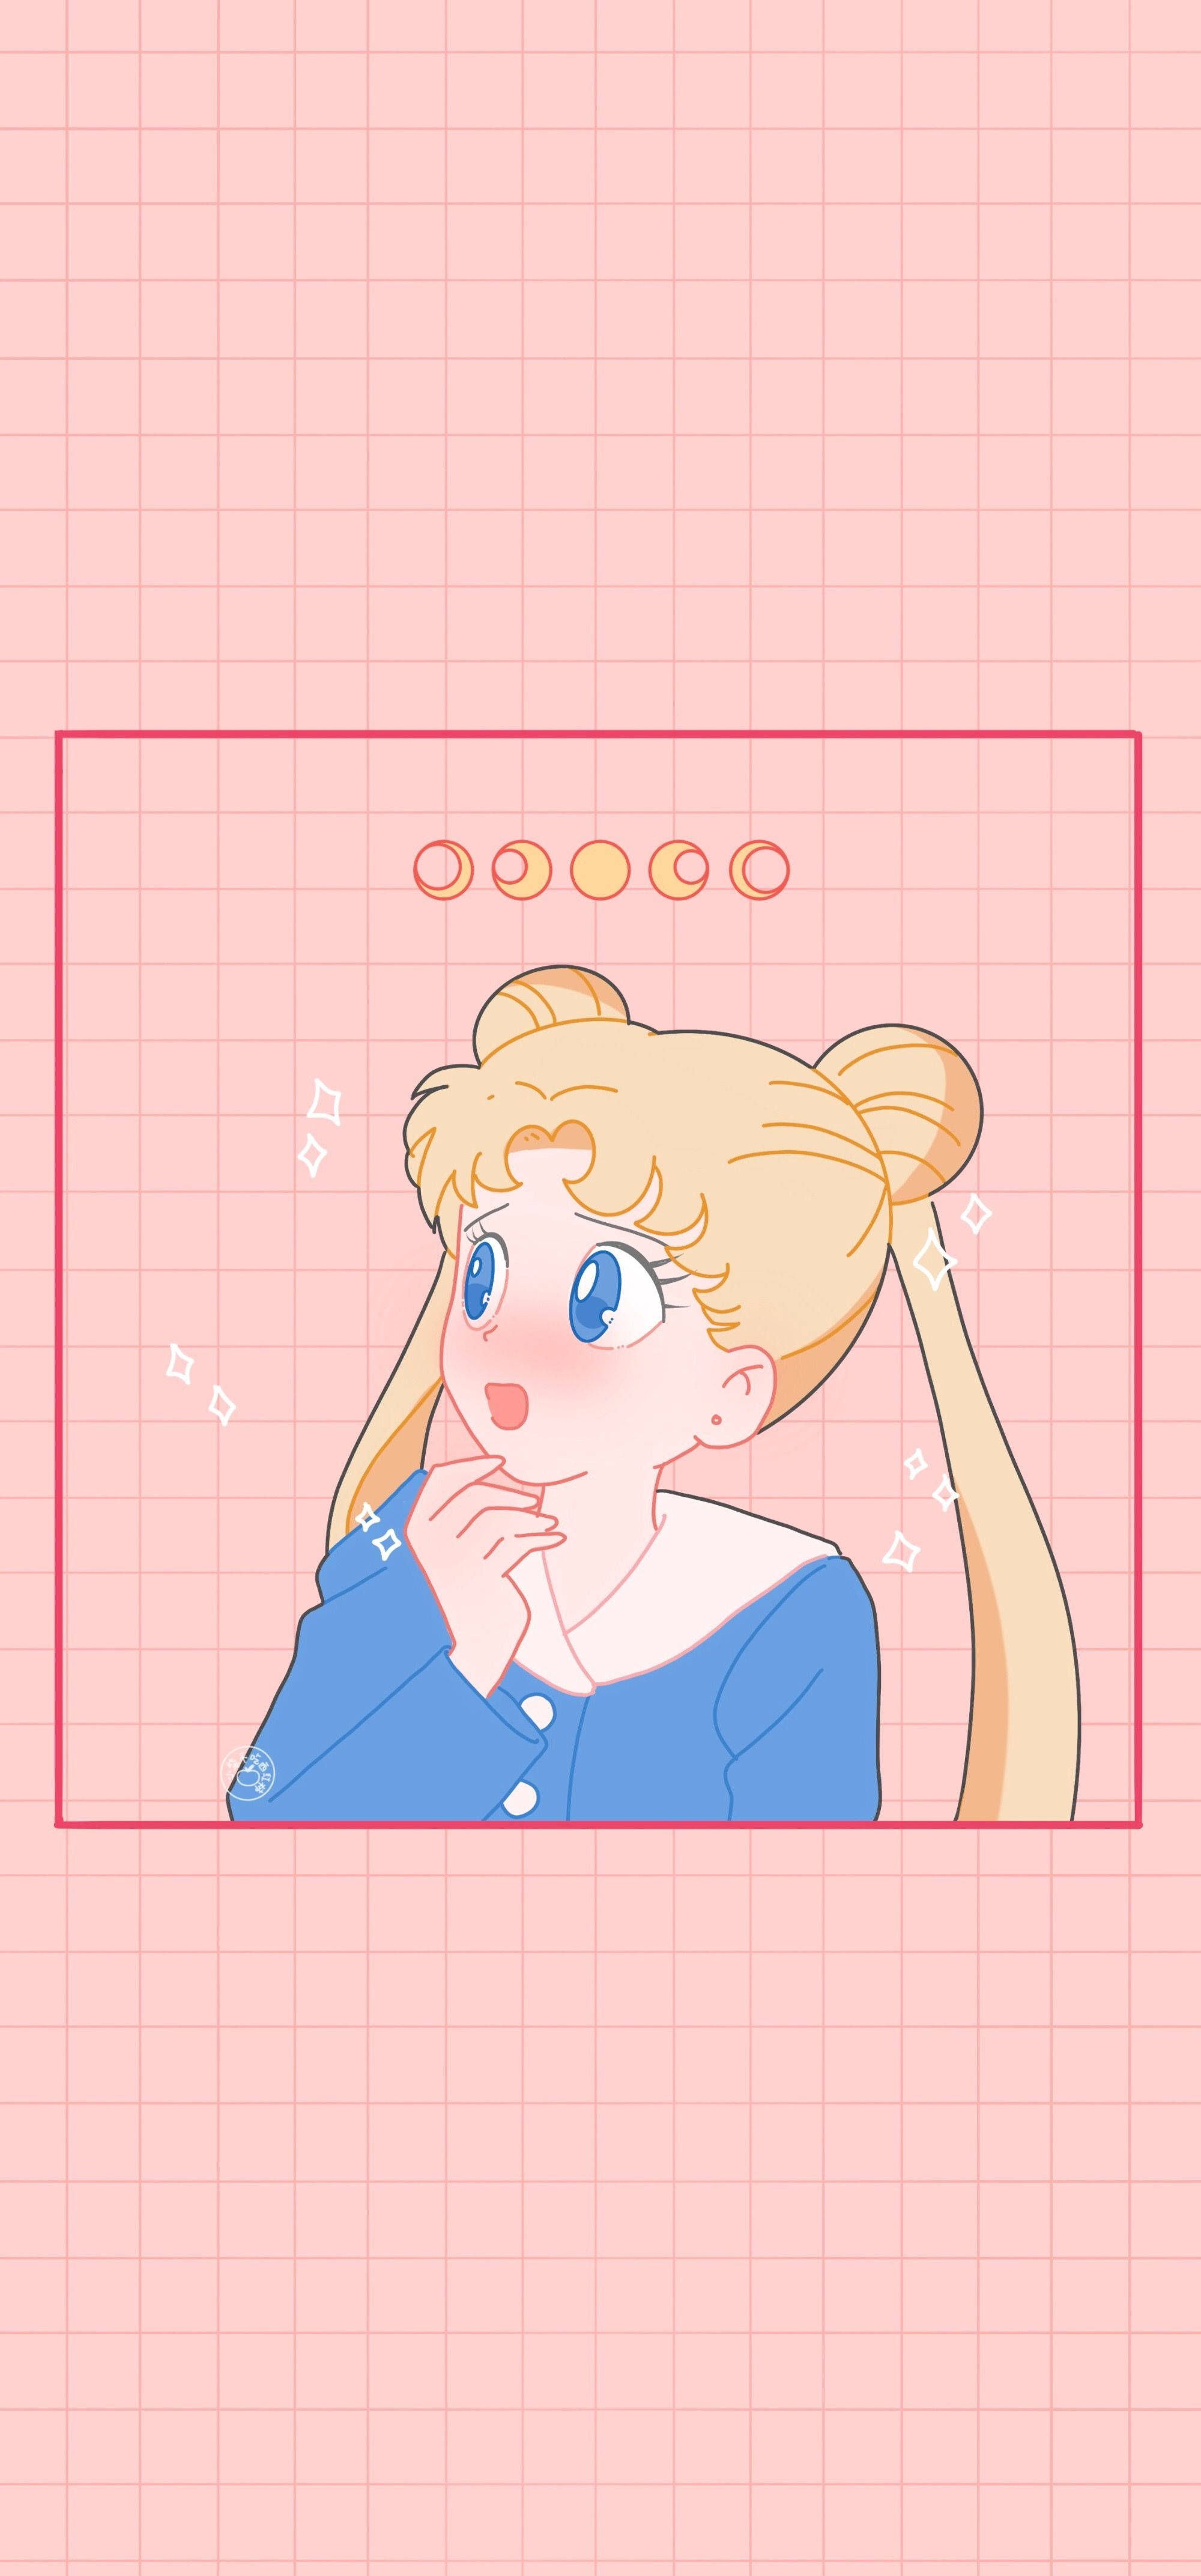 A cartoon character with blue hair and pink background - Sailor Moon